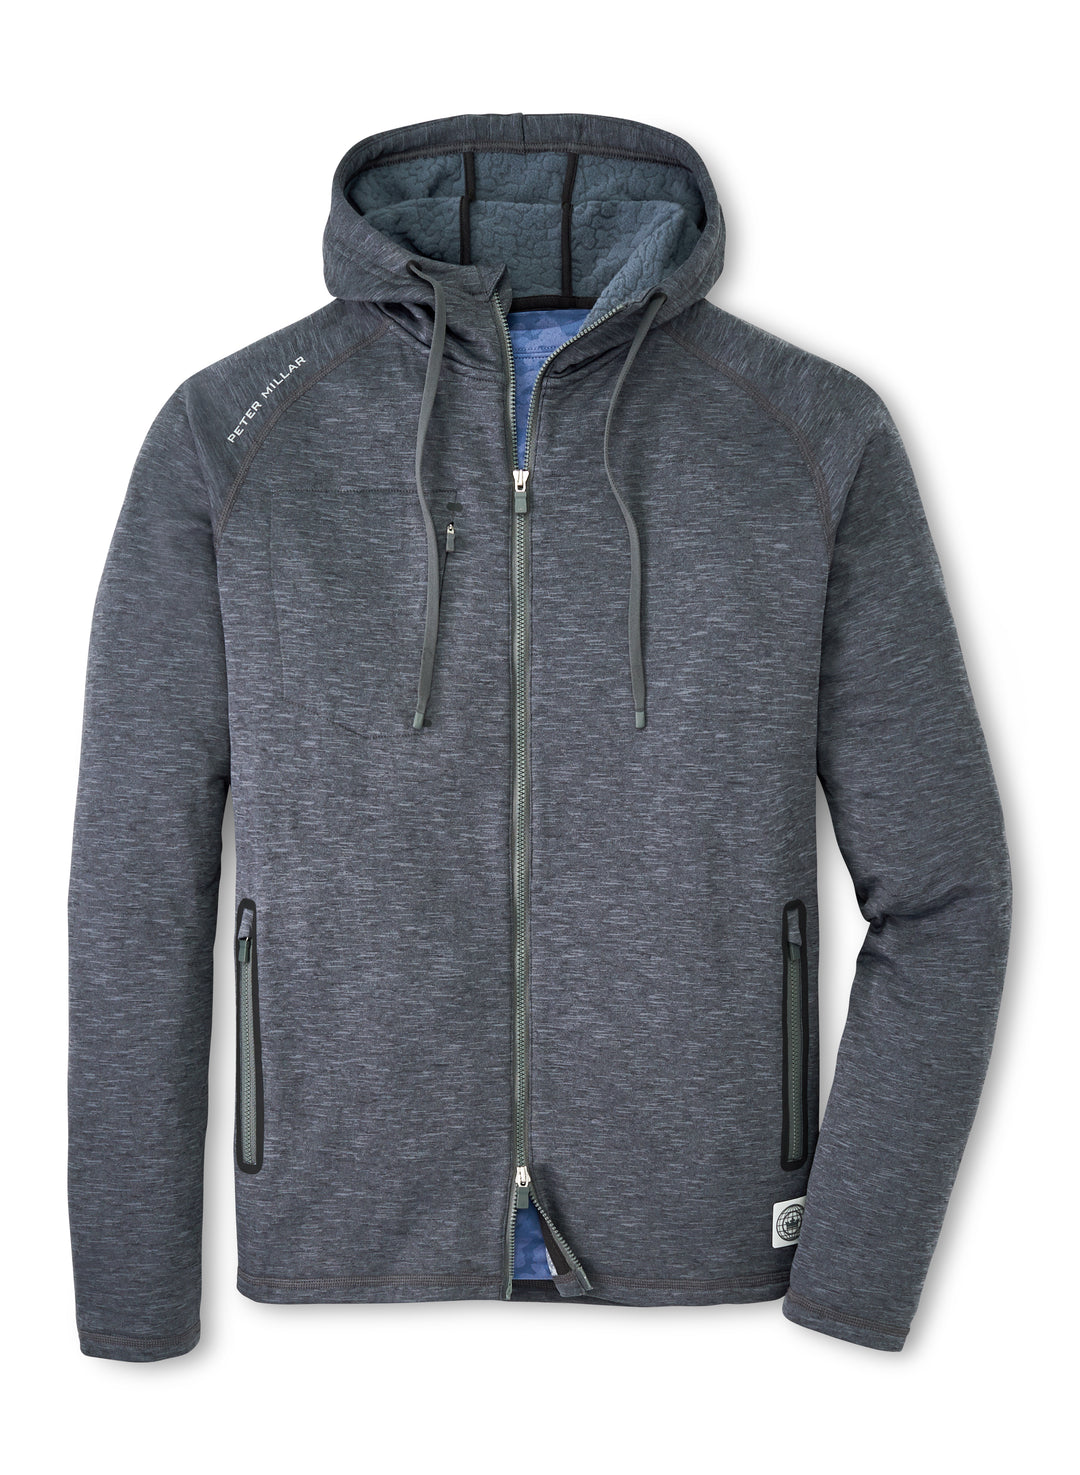 Eclipse Performance Hoodie in Iron